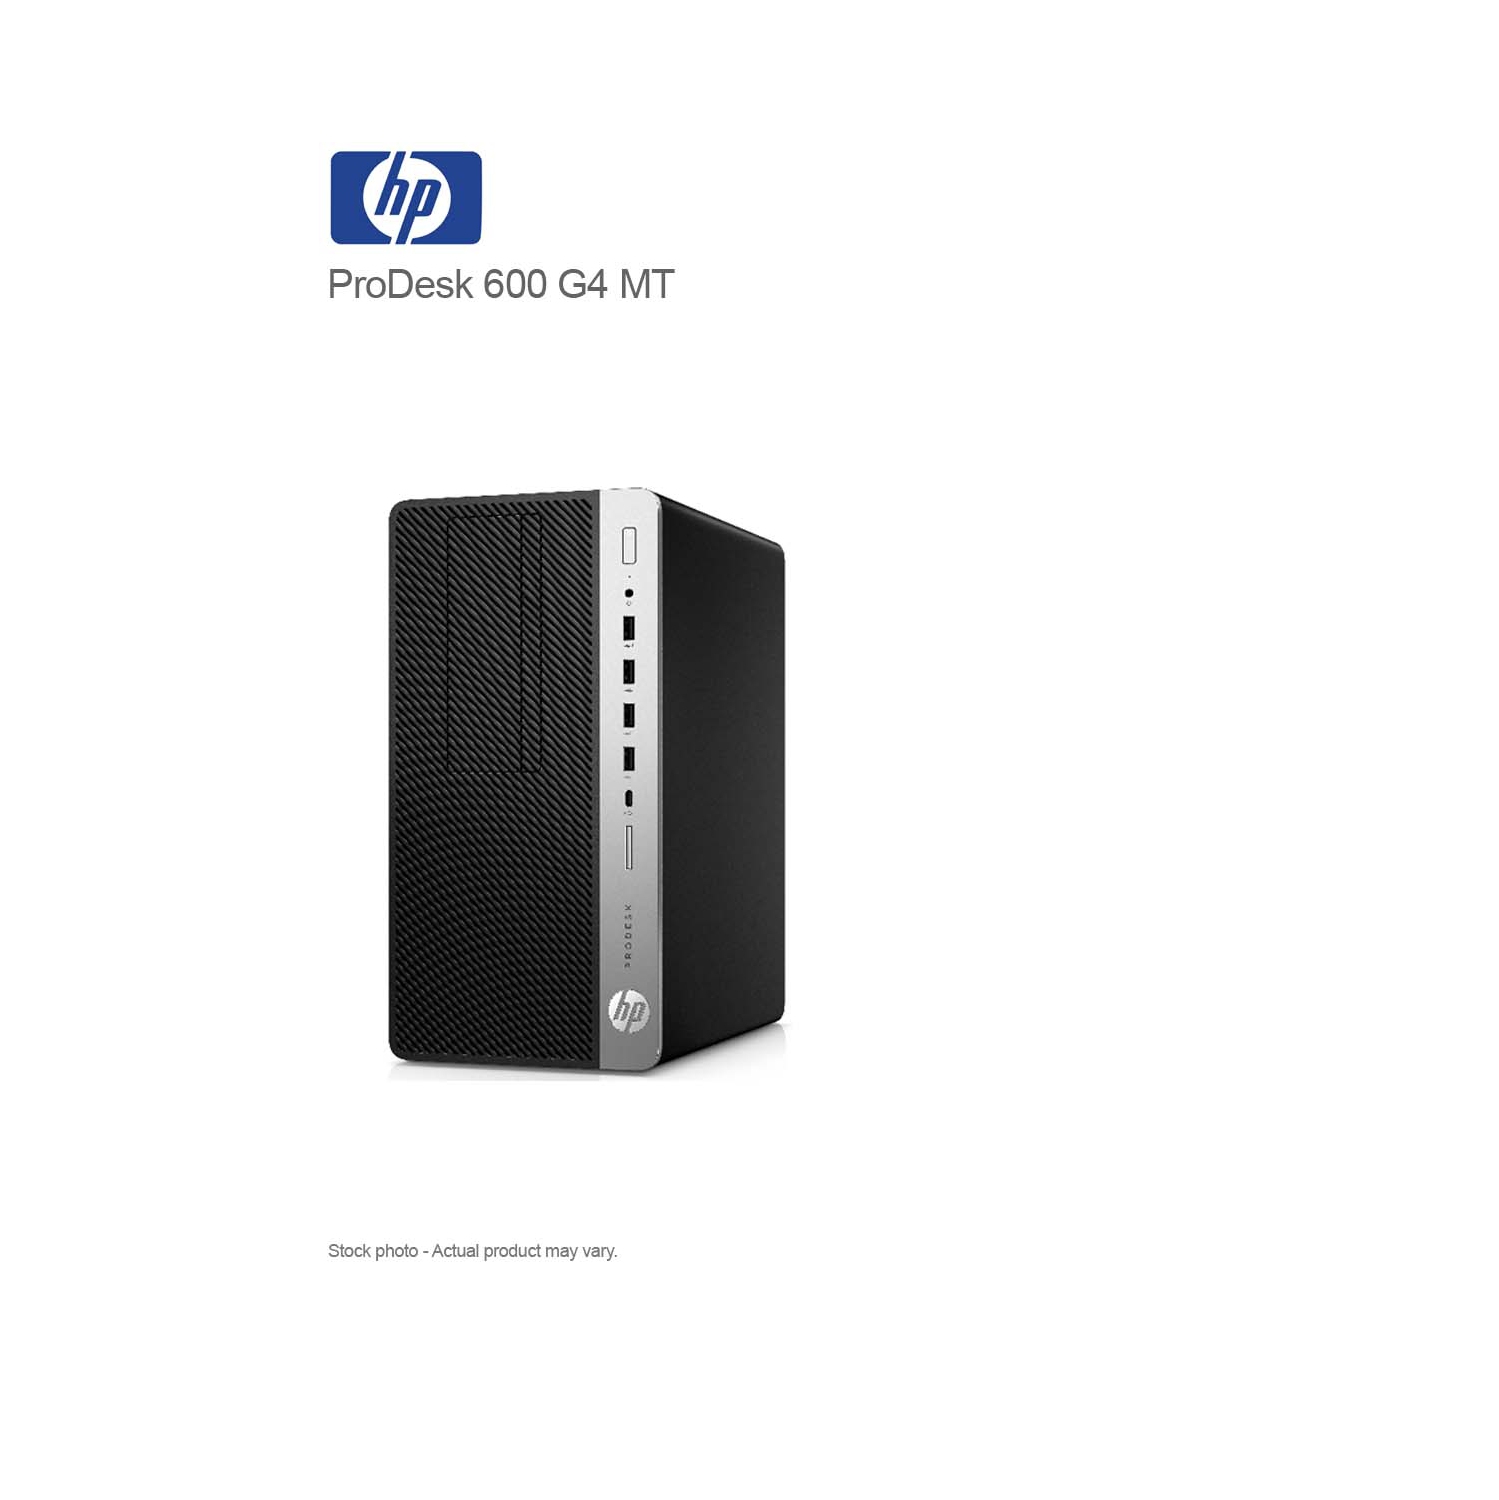 HP ProDesk 600 G4 Tower Core i7-8700 upto 4.60GHz, 32GB, 1 TB M.2 NVMe, WiFi, AMD Radeon R7 430, WIN 11 PRO - Refurbished (Excellent)